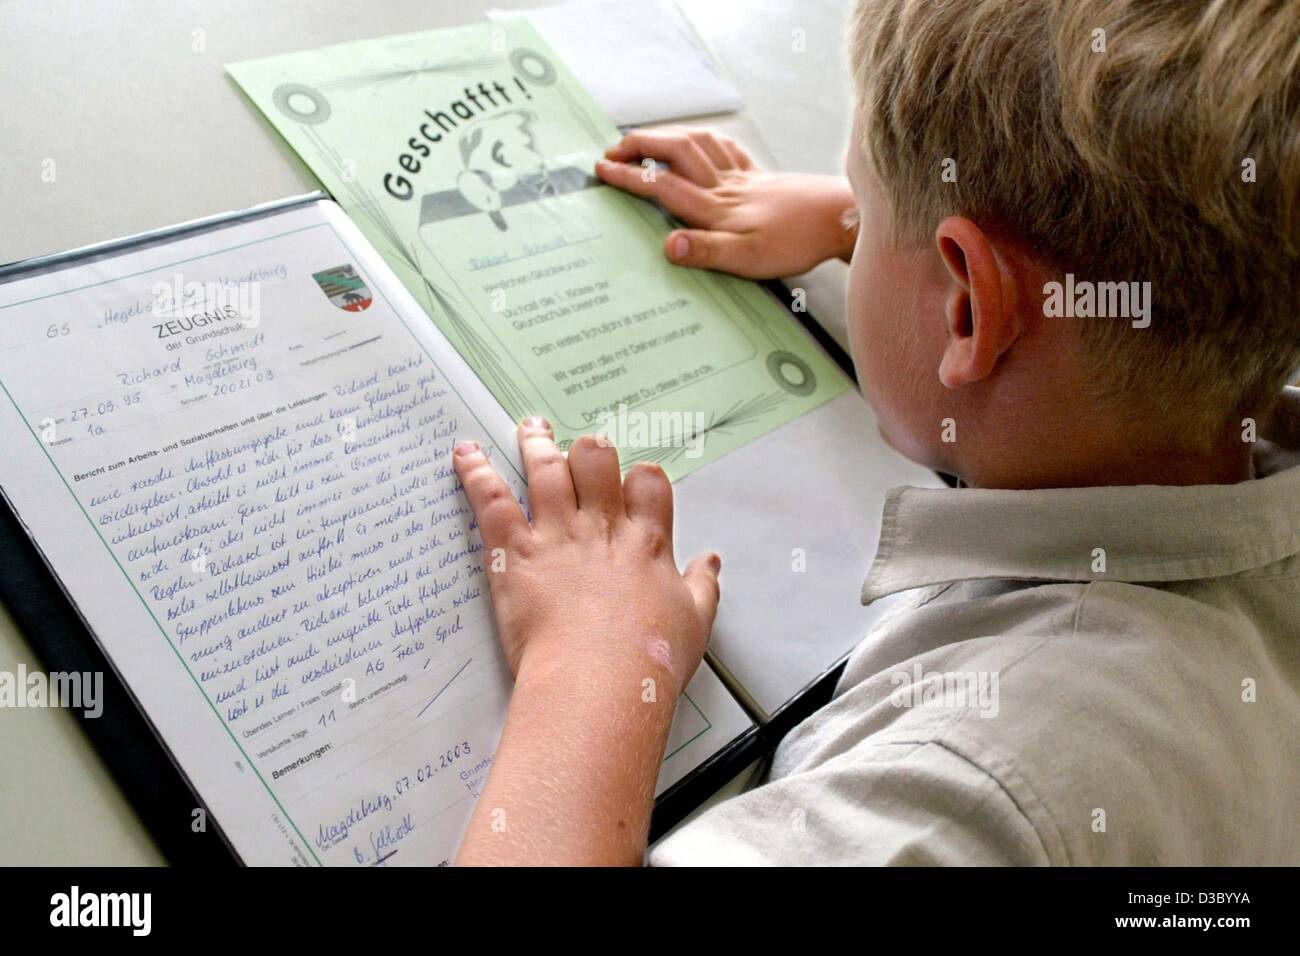 (dpa) - A first grader looks at his first end-of-year school report ('Zeugnis') at an elementary school in Magdeburg, Germany, 9 July 2003. The headline of the green paper reads 'Geschafft!' (made it!). The day was also the last day of school before the start of the summer holidays. Stock Photo